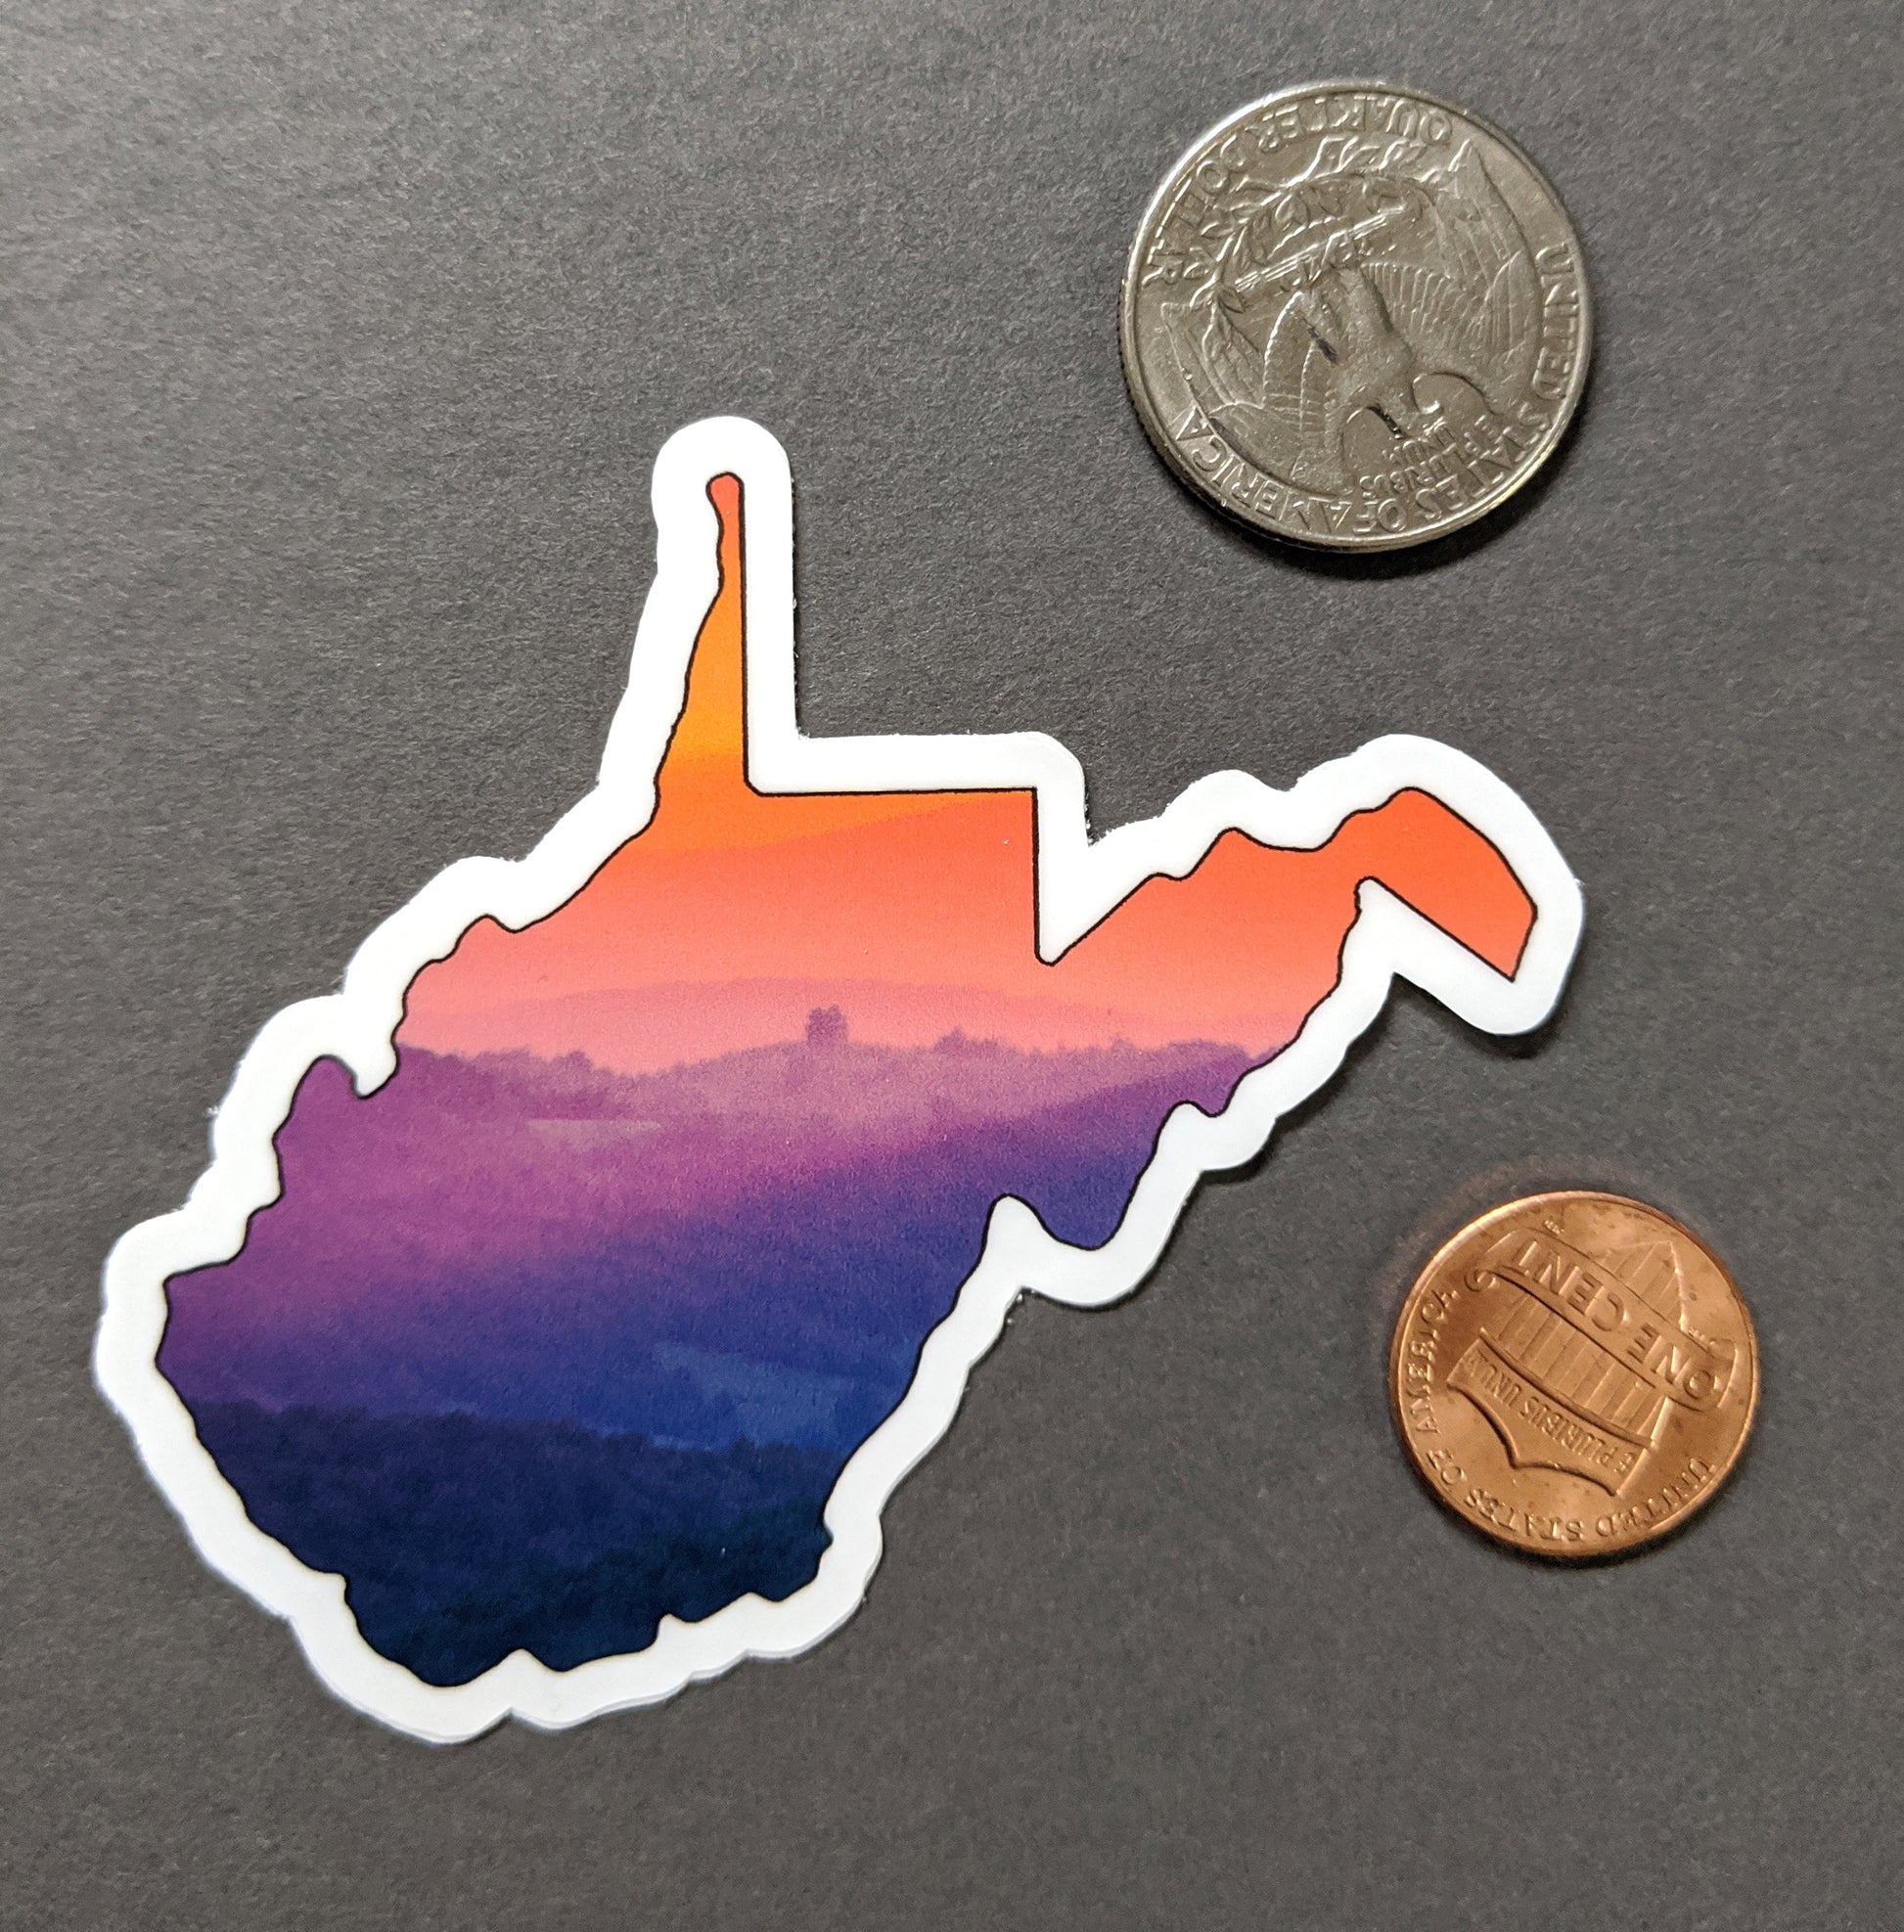 West Virginia Red Mountains Sticker - Vinyl Sticker - Sunset - Reflection in a Pool